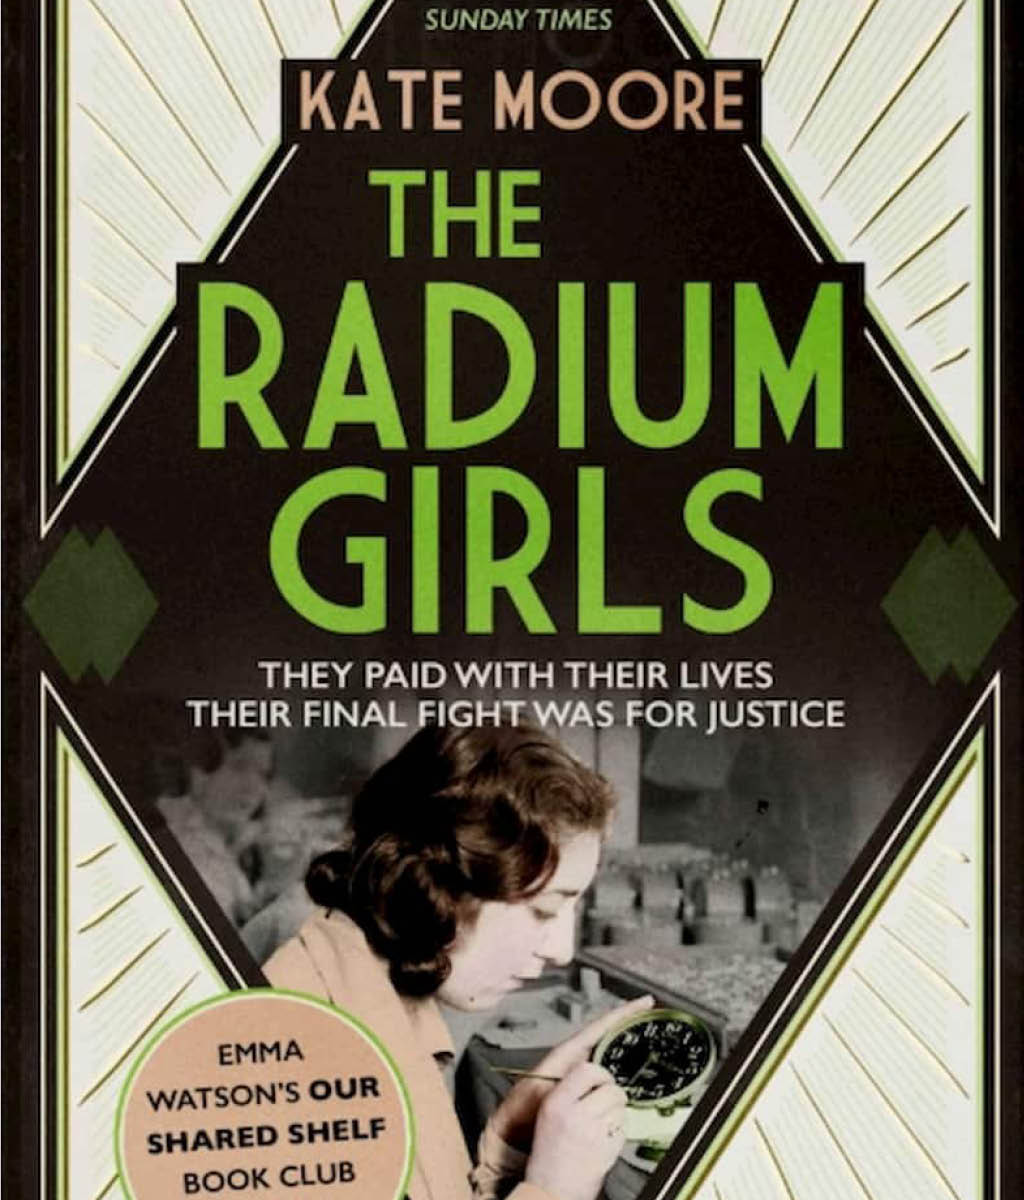 The Radium Girls : They paid with their lives. Their final fight was for justice